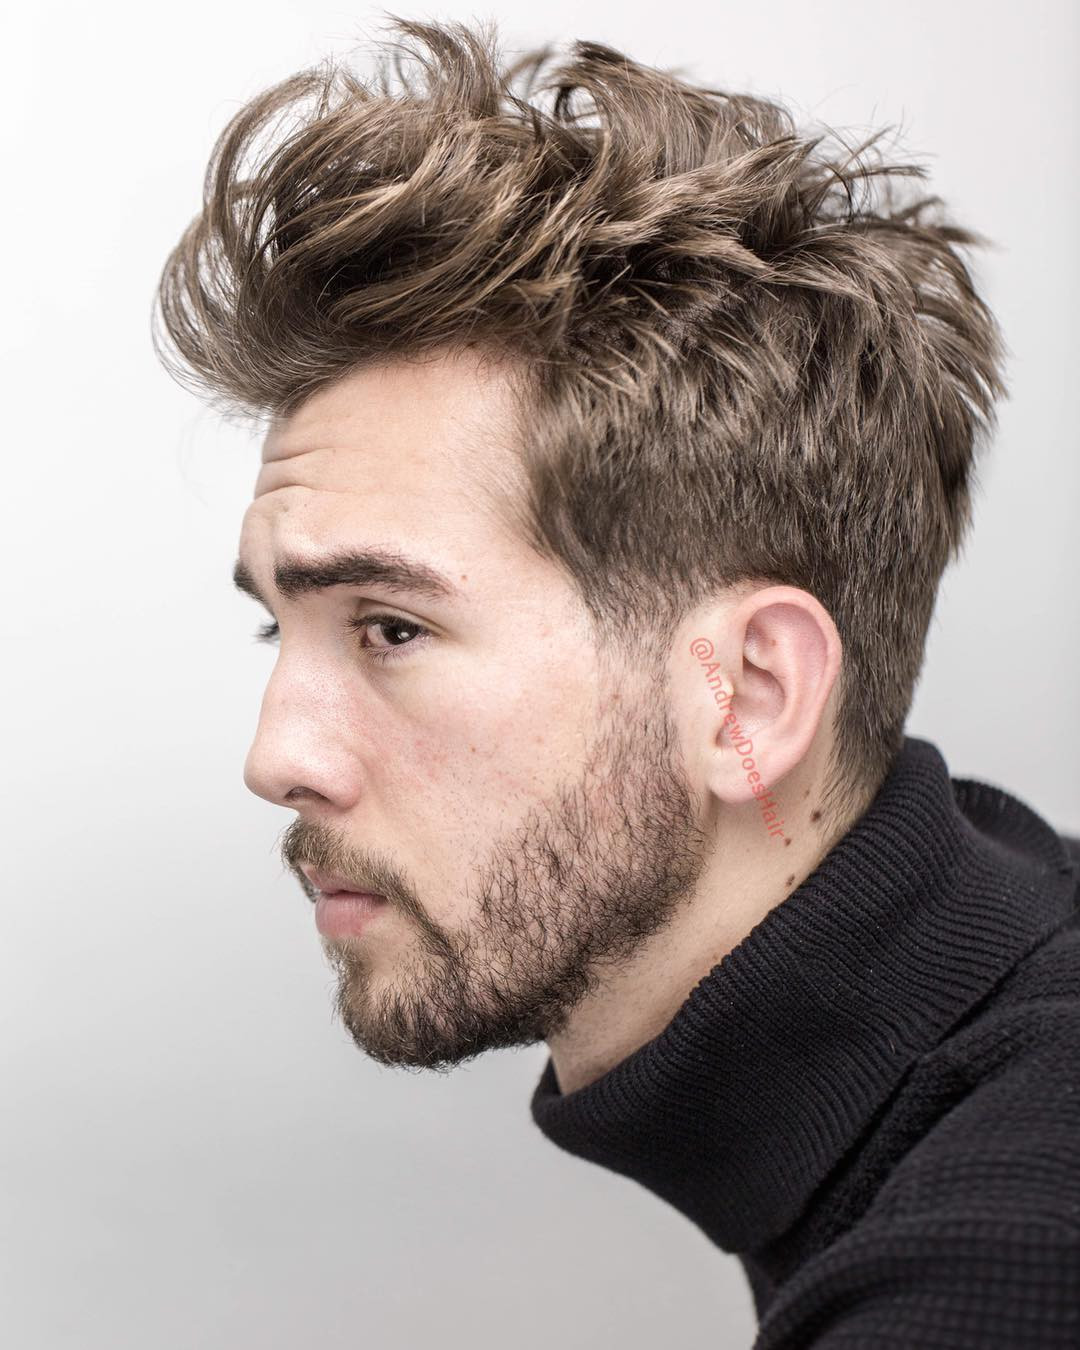 Mens Mid Length Hairstyles
 The 60 Best Medium Length Hairstyles for Men